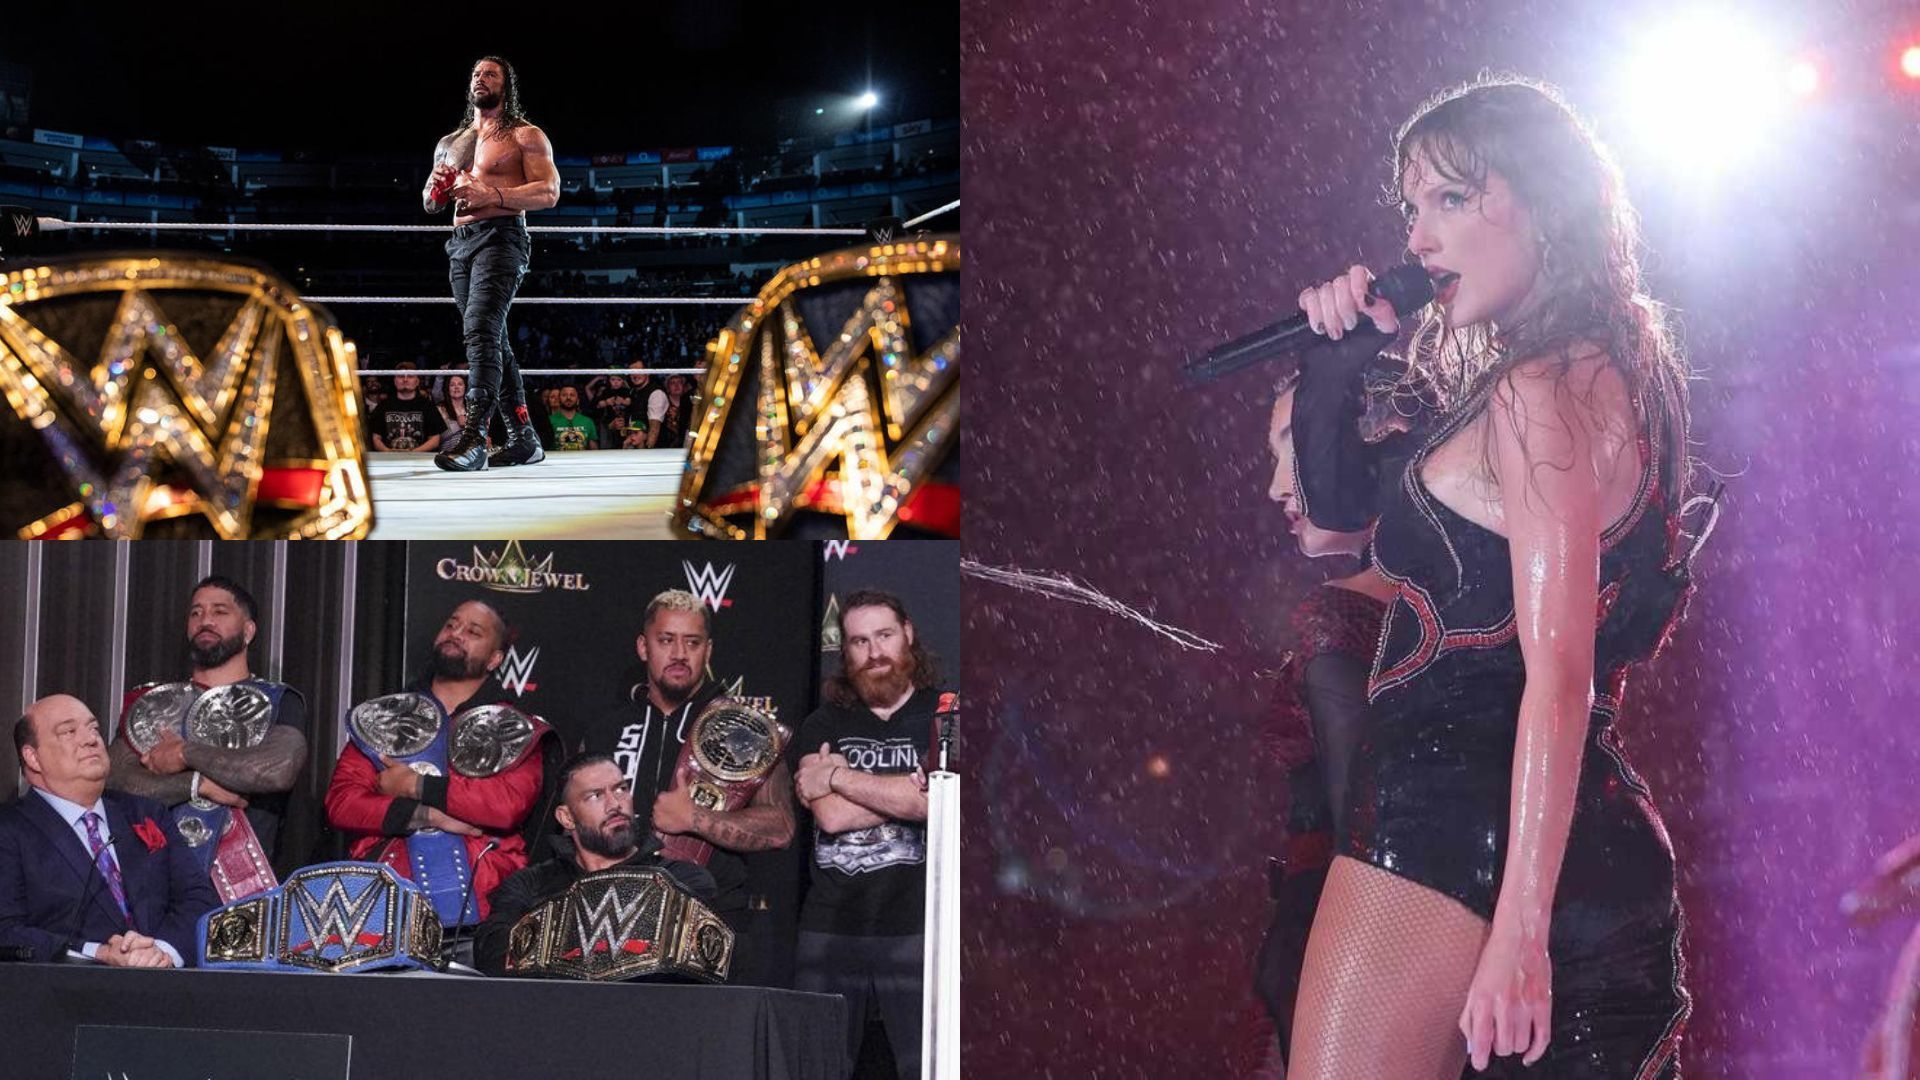 A WWE legend joked about Taylor Swift acknowledging The Bloodline